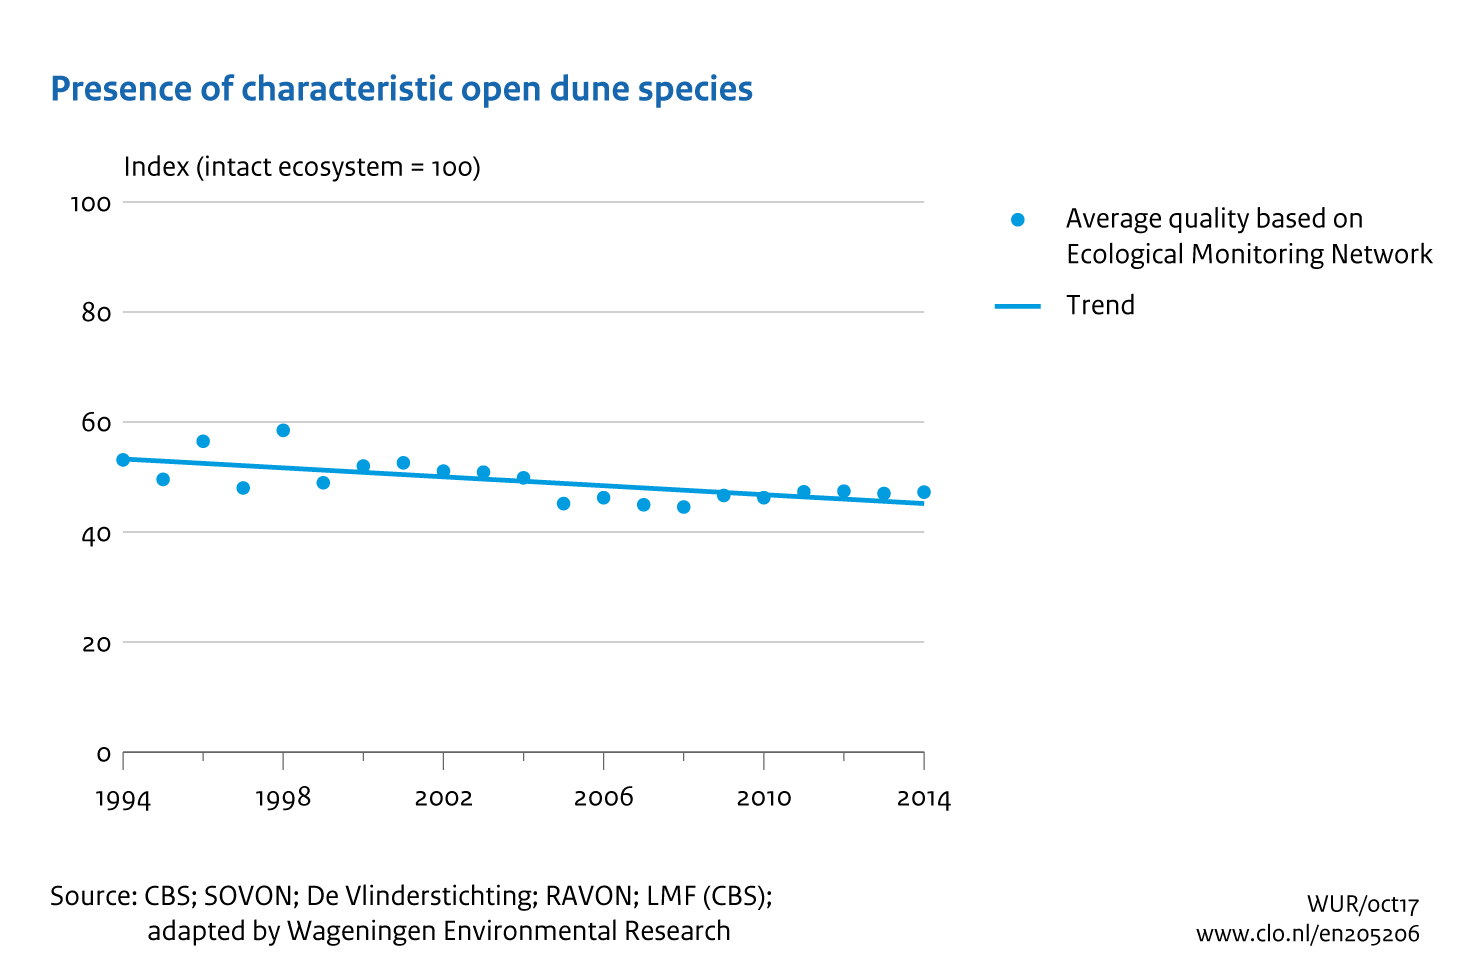 Image Presence of characteristic open dunes species. The image is further explained in the text.